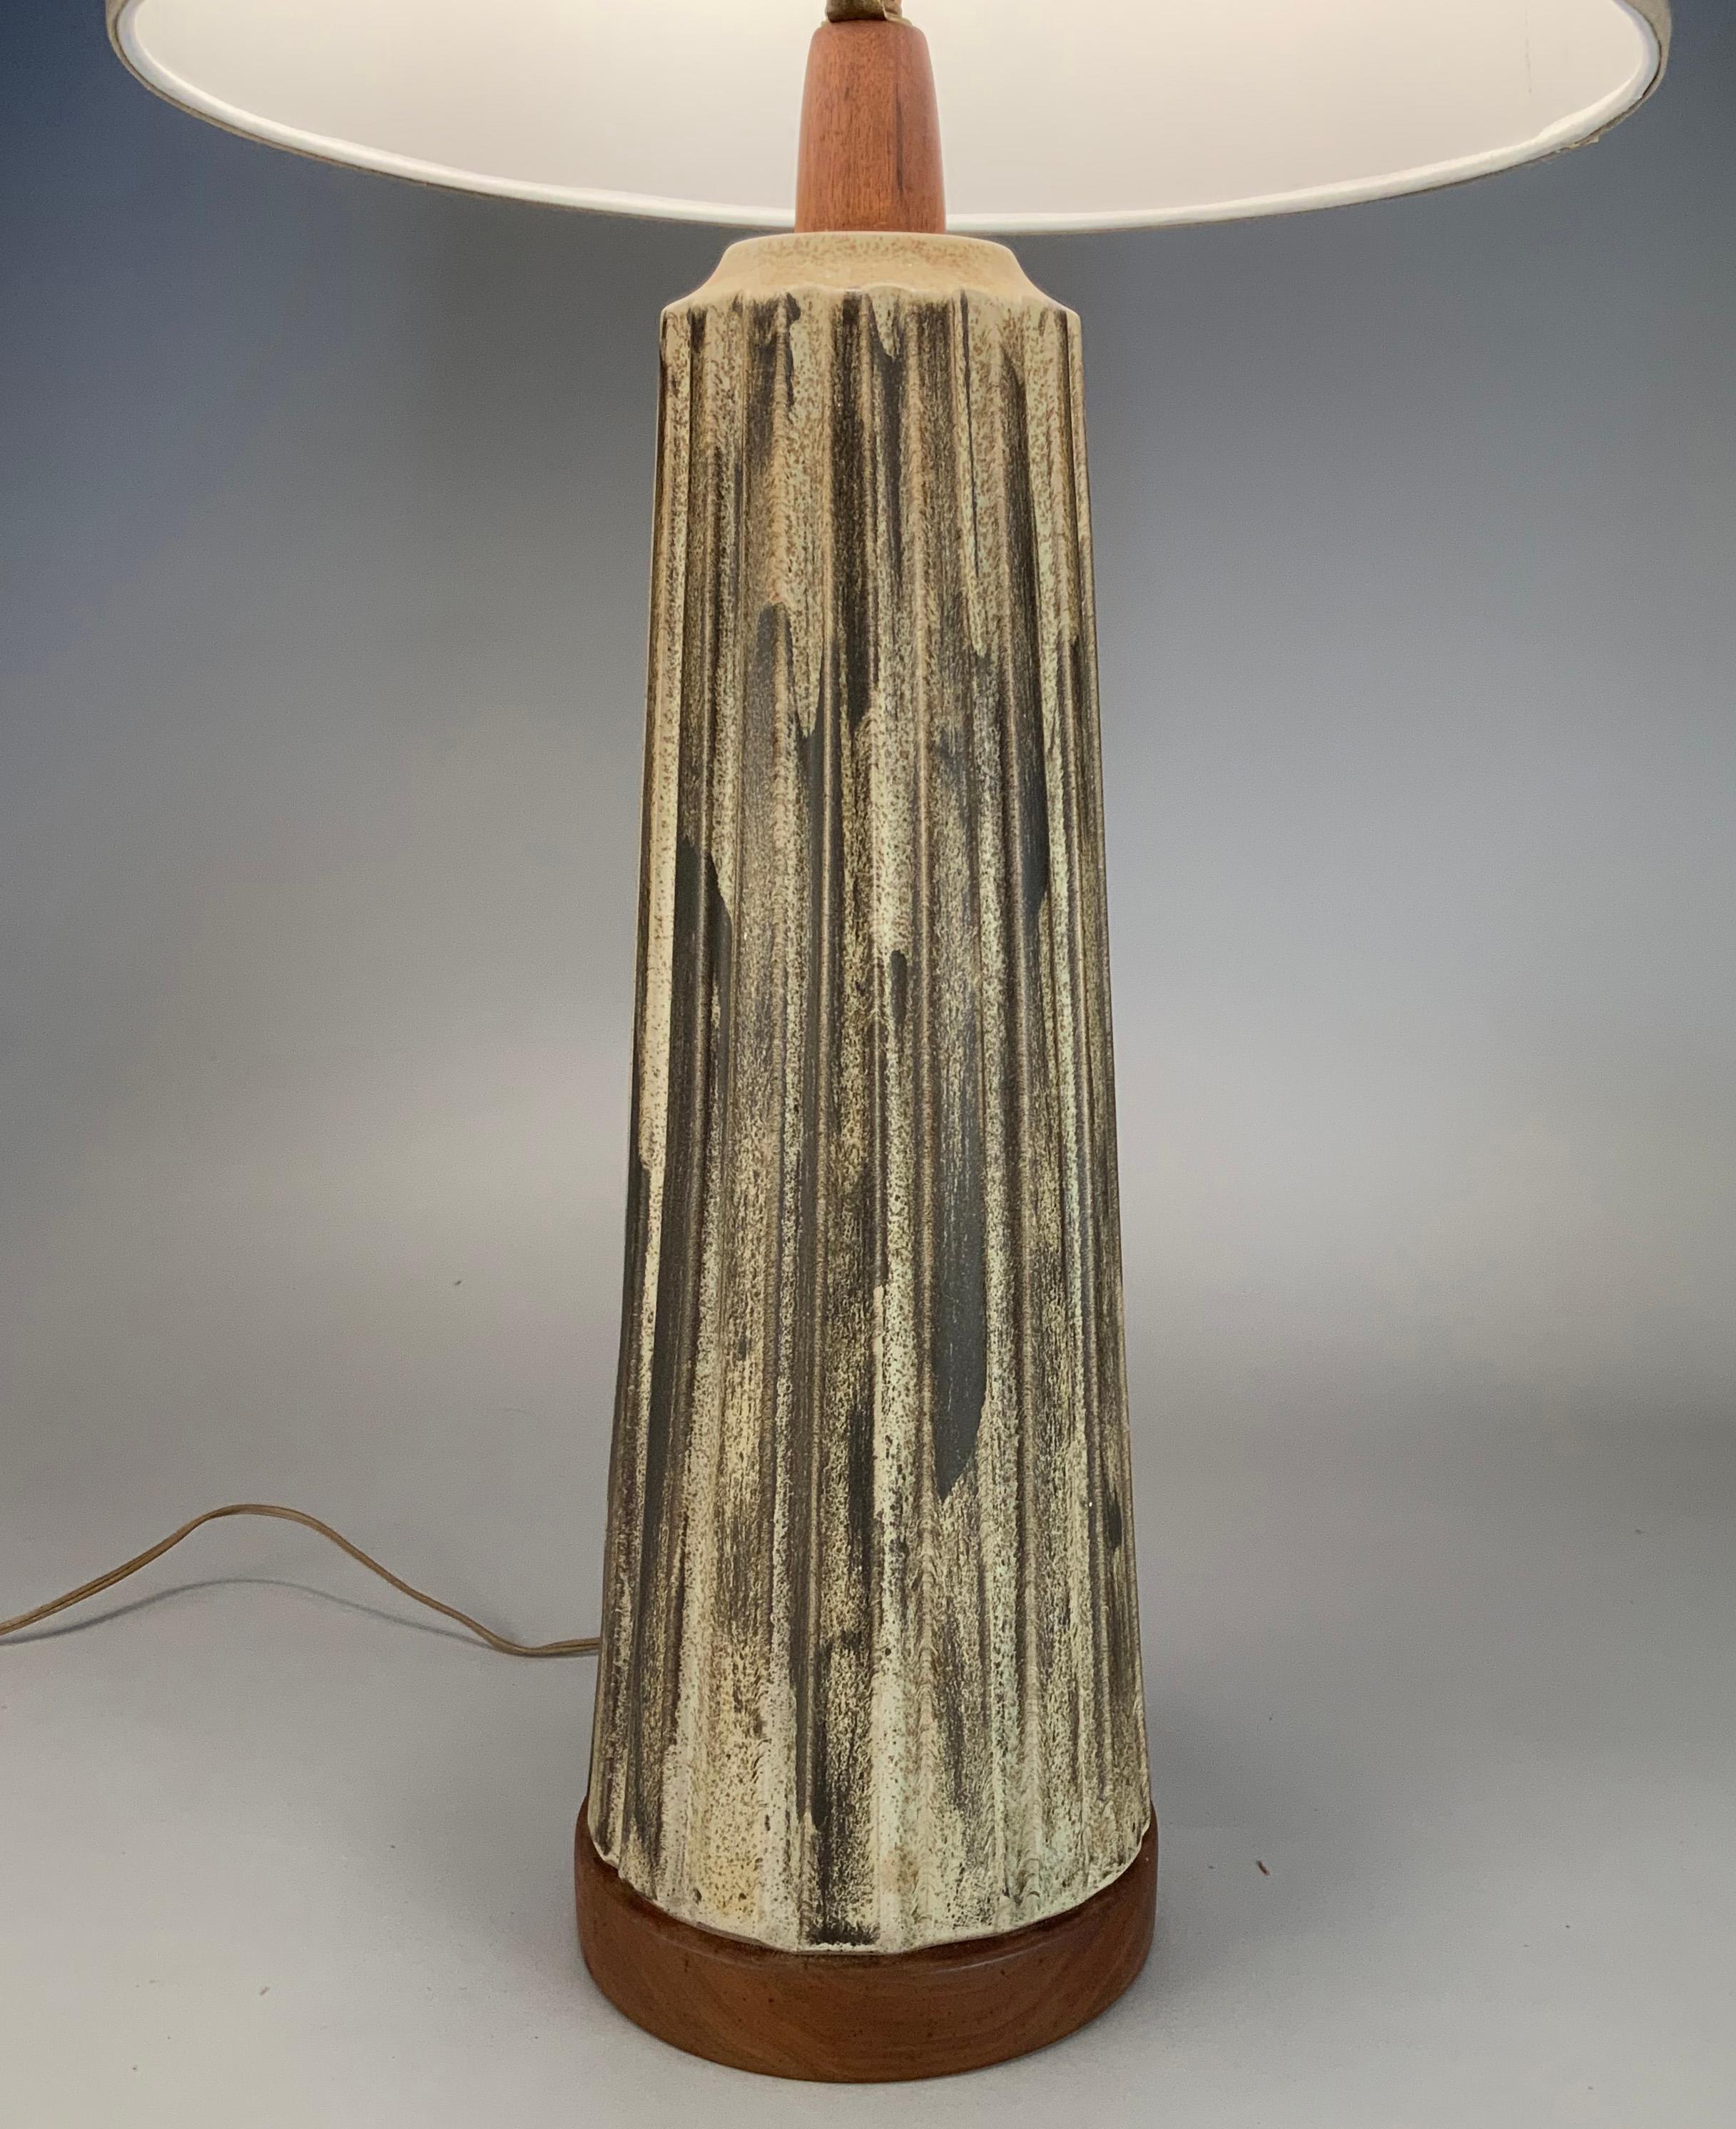 A beautiful and impressive 1950's ceramic lamp with walnut base and stem by Gordon Martz. The tapered lamp with a scalloped surface, finished and glazed in shades of cream and charcoal gray. Mint condition.